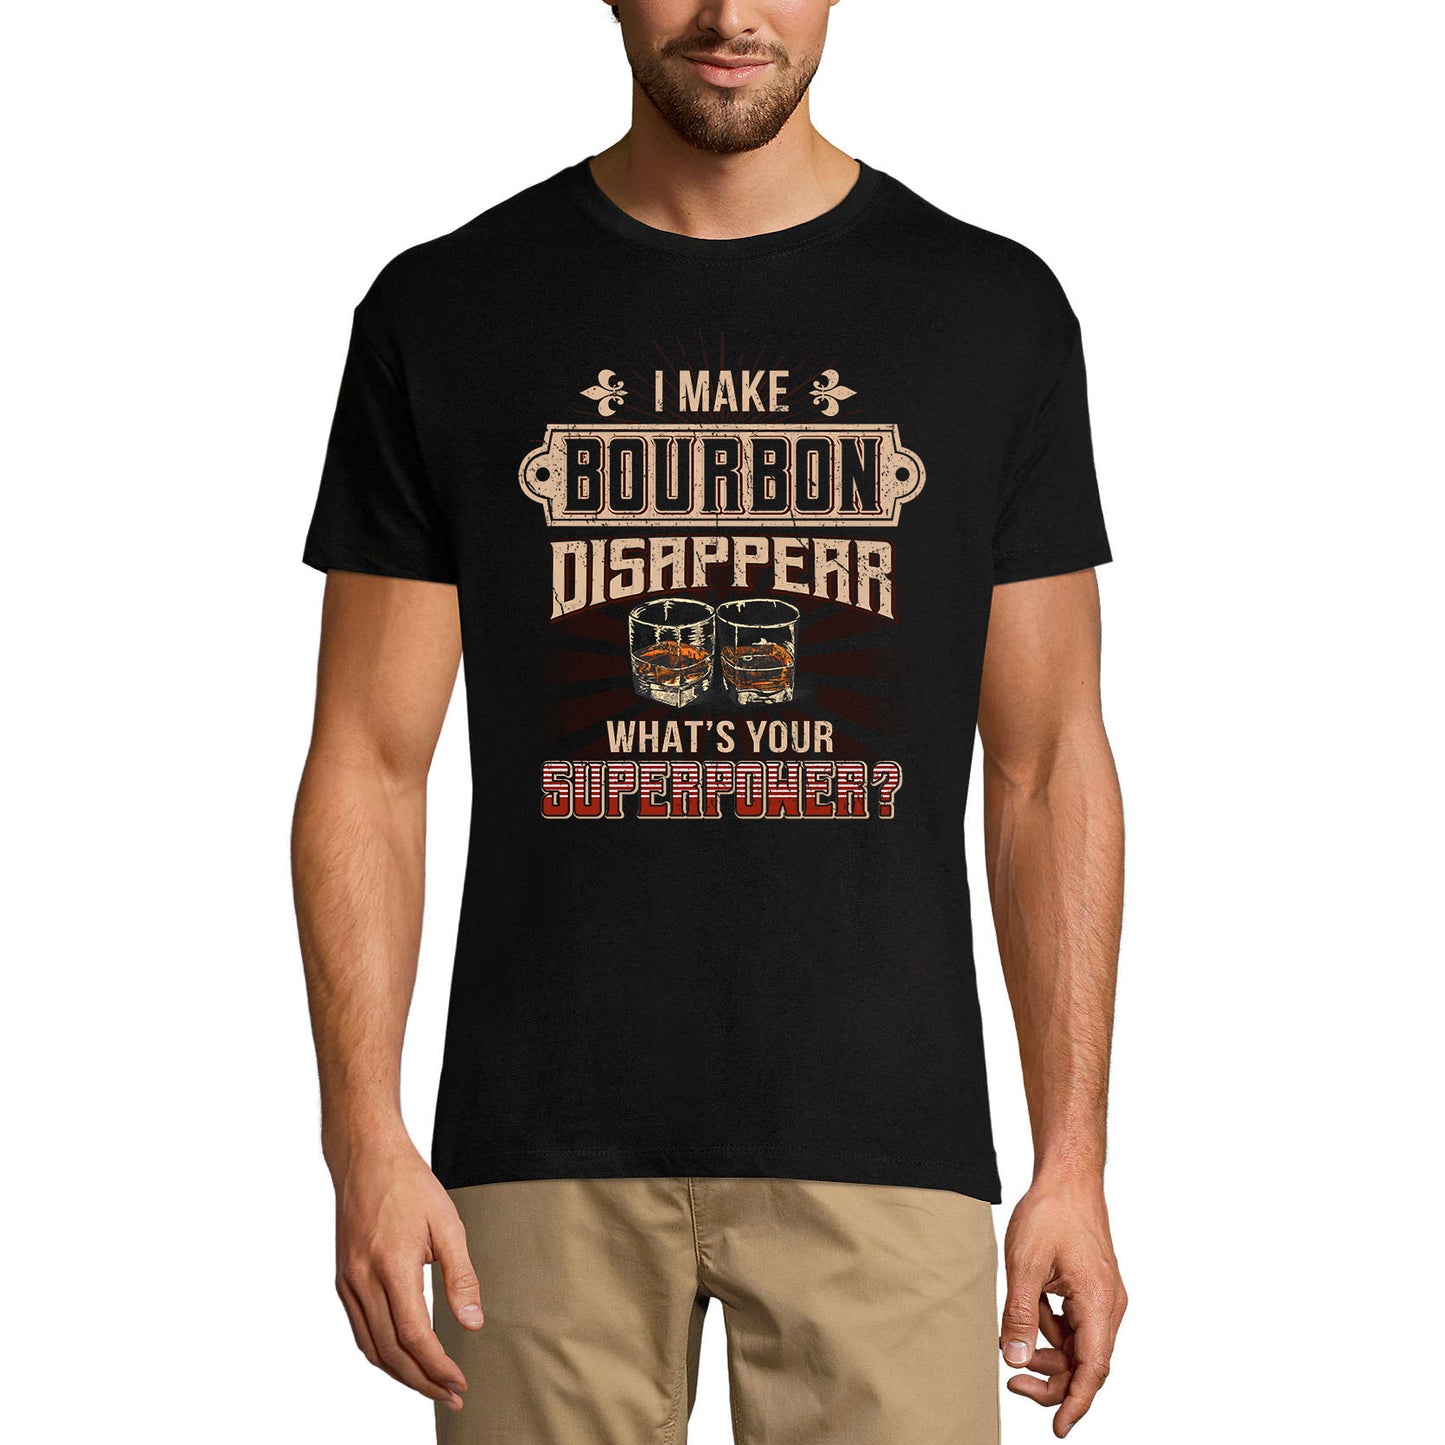 ULTRABASIC Men's T-Shirt I Make Bourbon Disappear - What's Your Superpower - Alcohol Lover Drinking Tee Shirt